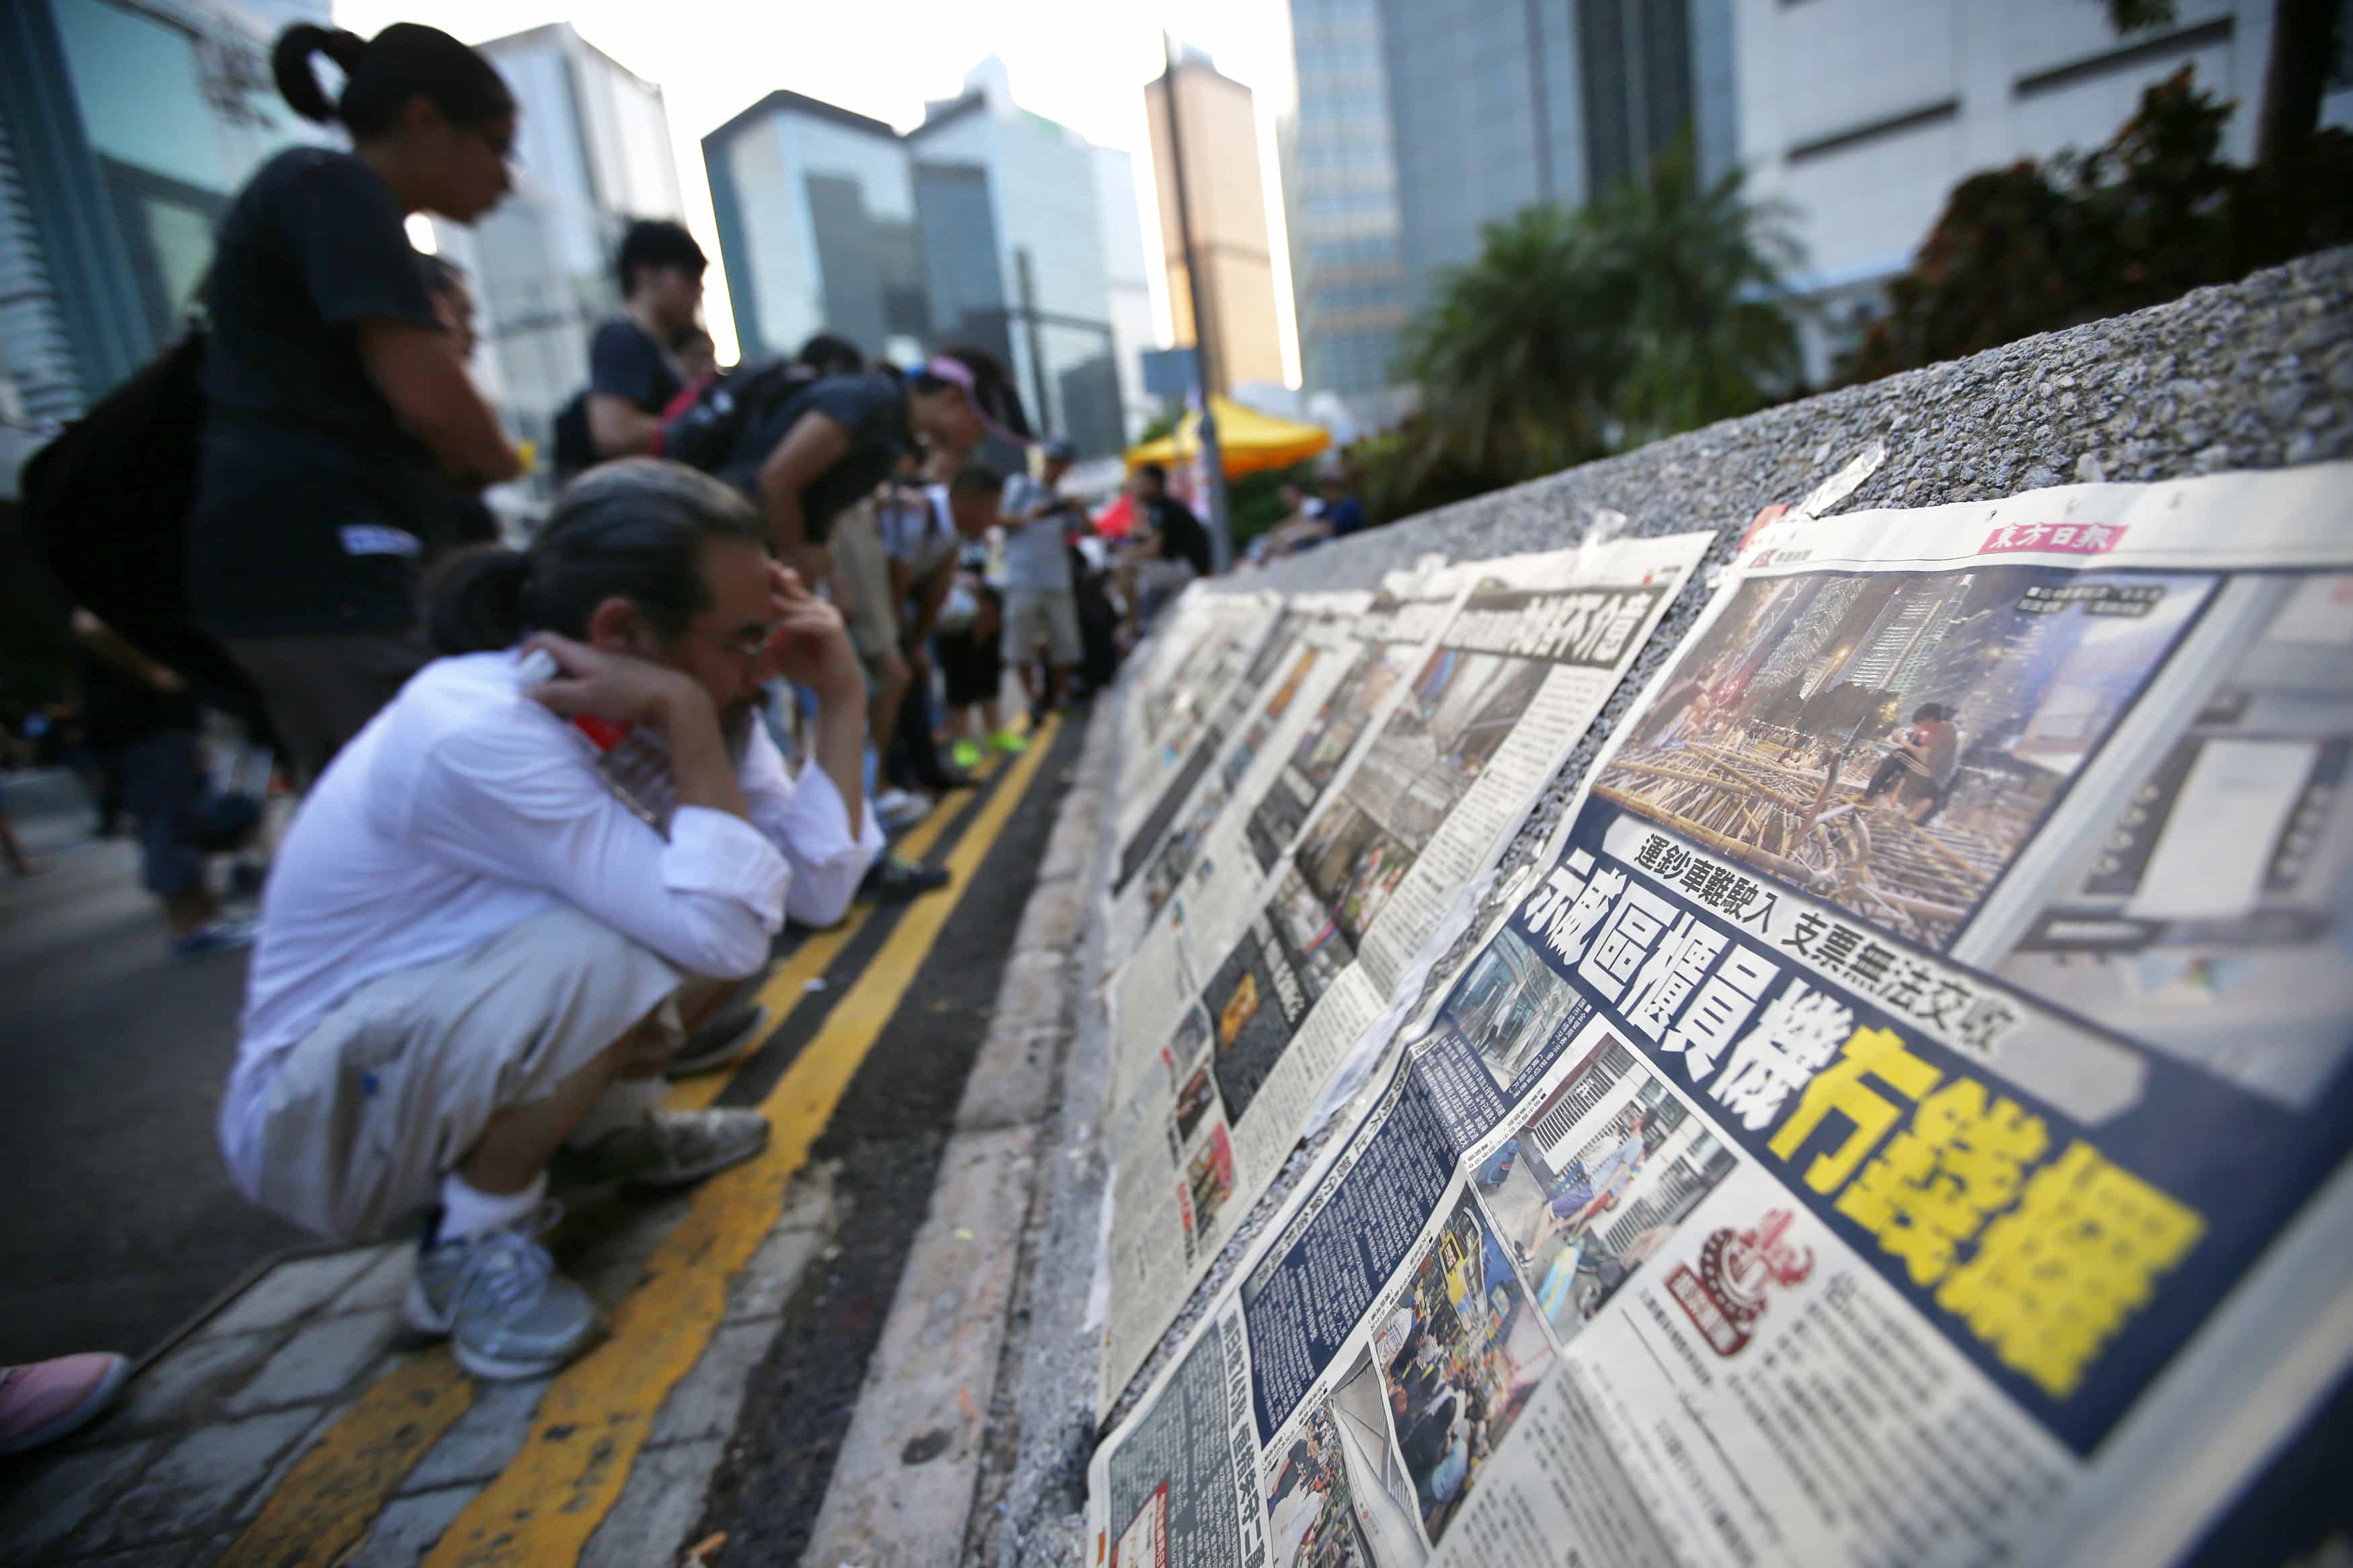 People read newspapers on a street blocked by protesters outside of the government headquarters building in Hong Kong, 1 October 2014, REUTERS/Carlos Barria